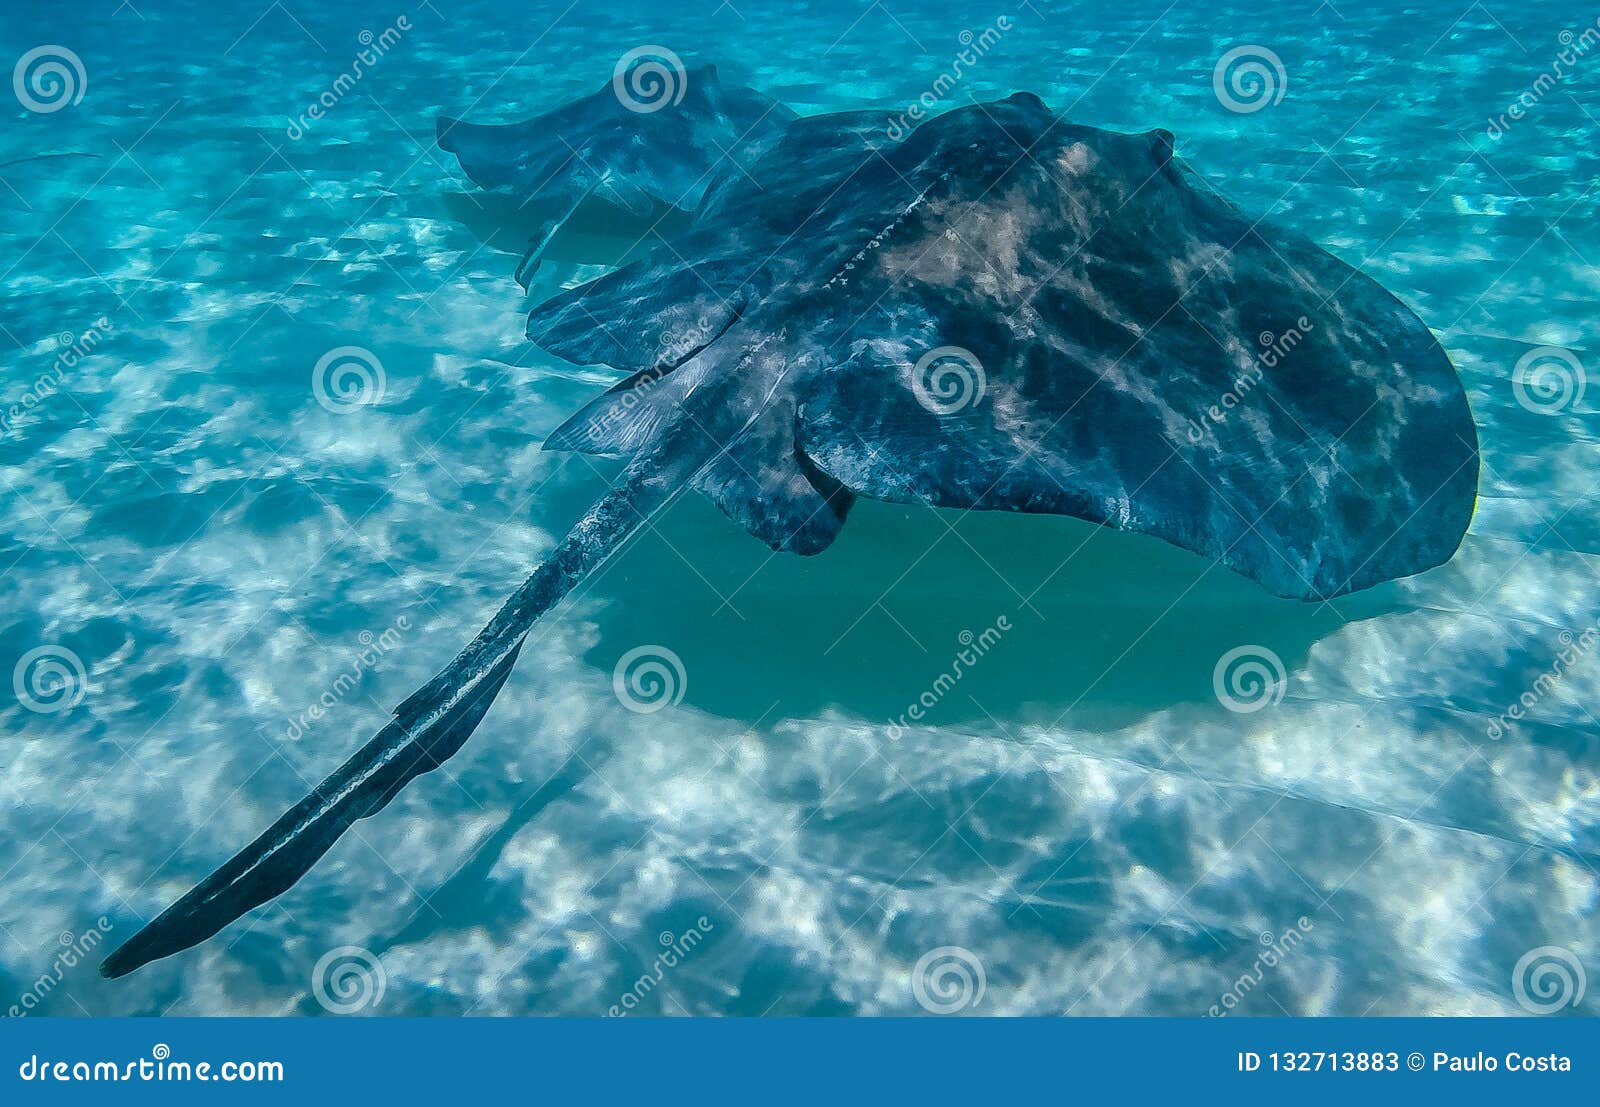 stingray in the grand cayman, cayman islands